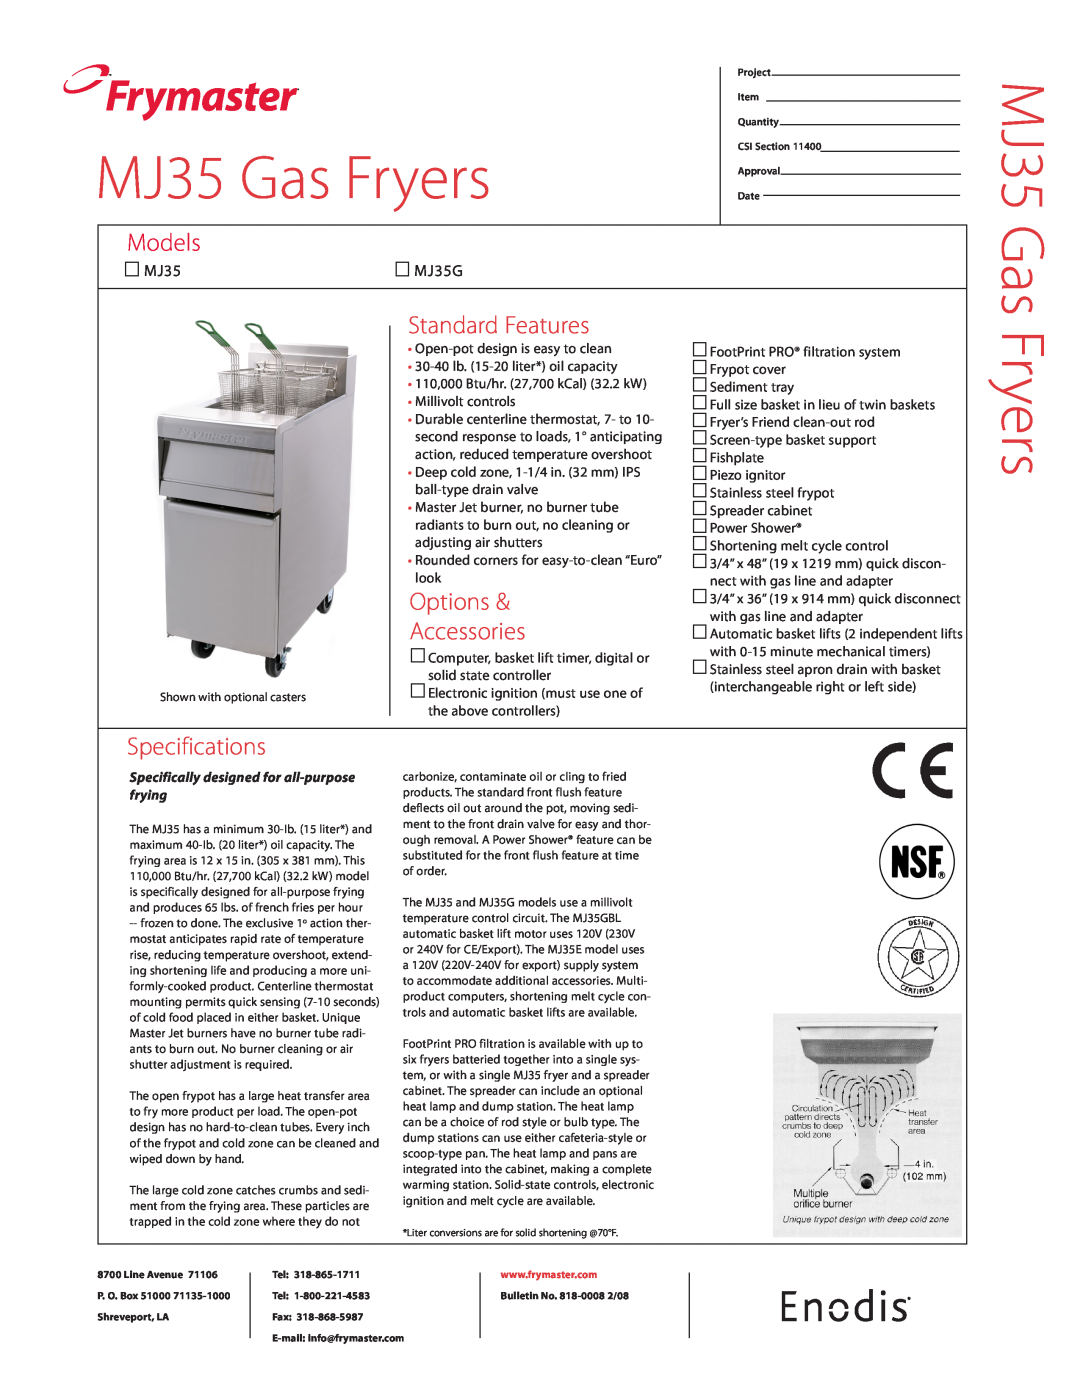 Frymaster MJ35G specifications MJ35 Gas Fryers, Frymaster, Models, Standard Features, Options, Accessories, Specifications 